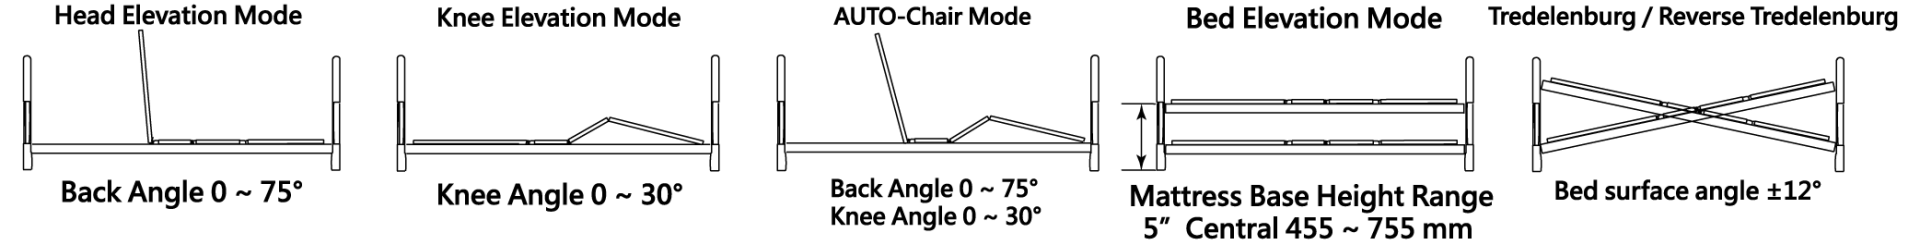 Joson-Care│Hospital Electric Bed│ES-12DW│Function mode bed lift angle diagram